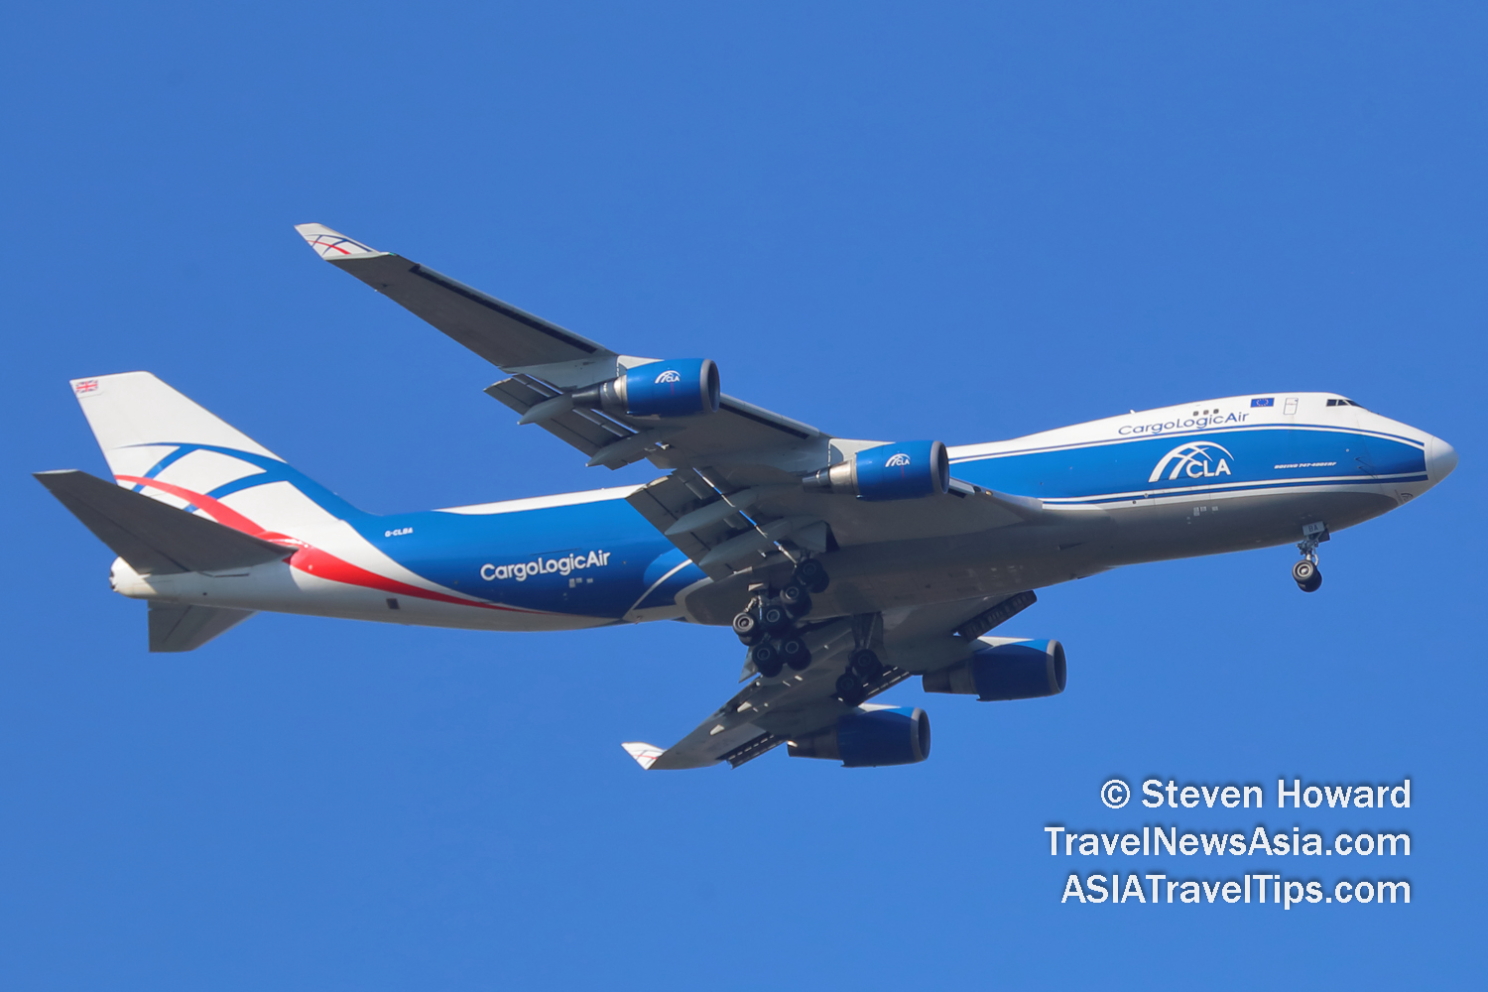 CargoLogicAir B747-400ERF reg: G-CLBA. Picture by Steven Howard of TravelNewsAsia.com Click to enlarge.